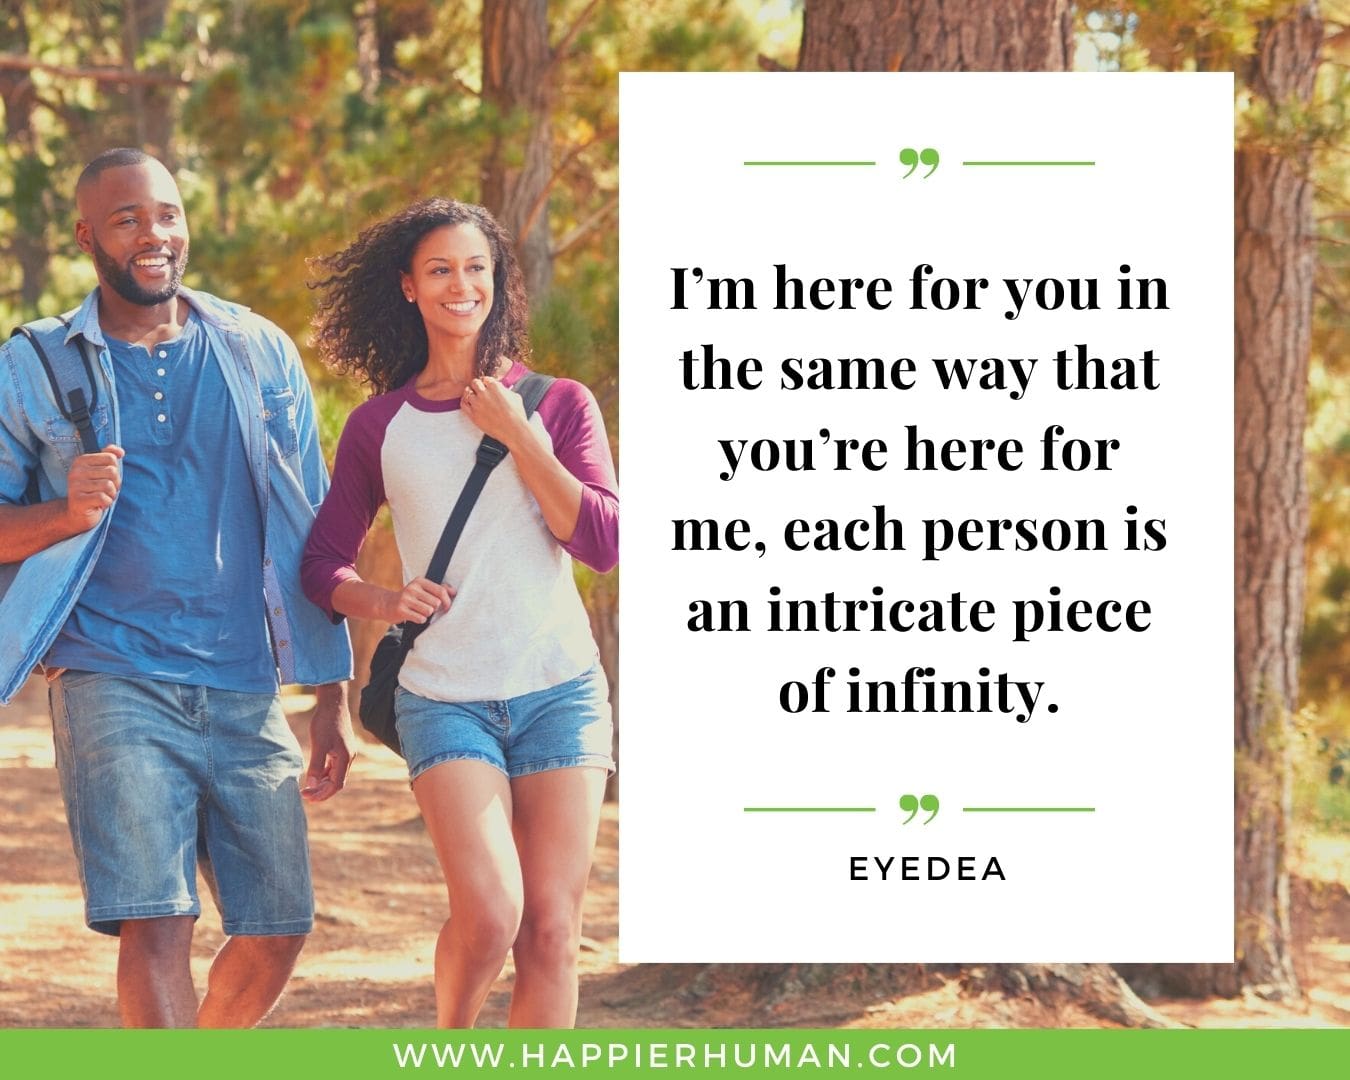 I’m Here for You Quotes - “I’m here for you in the same way that you’re here for me, each person is an intricate piece of infinity.” – Eyedea